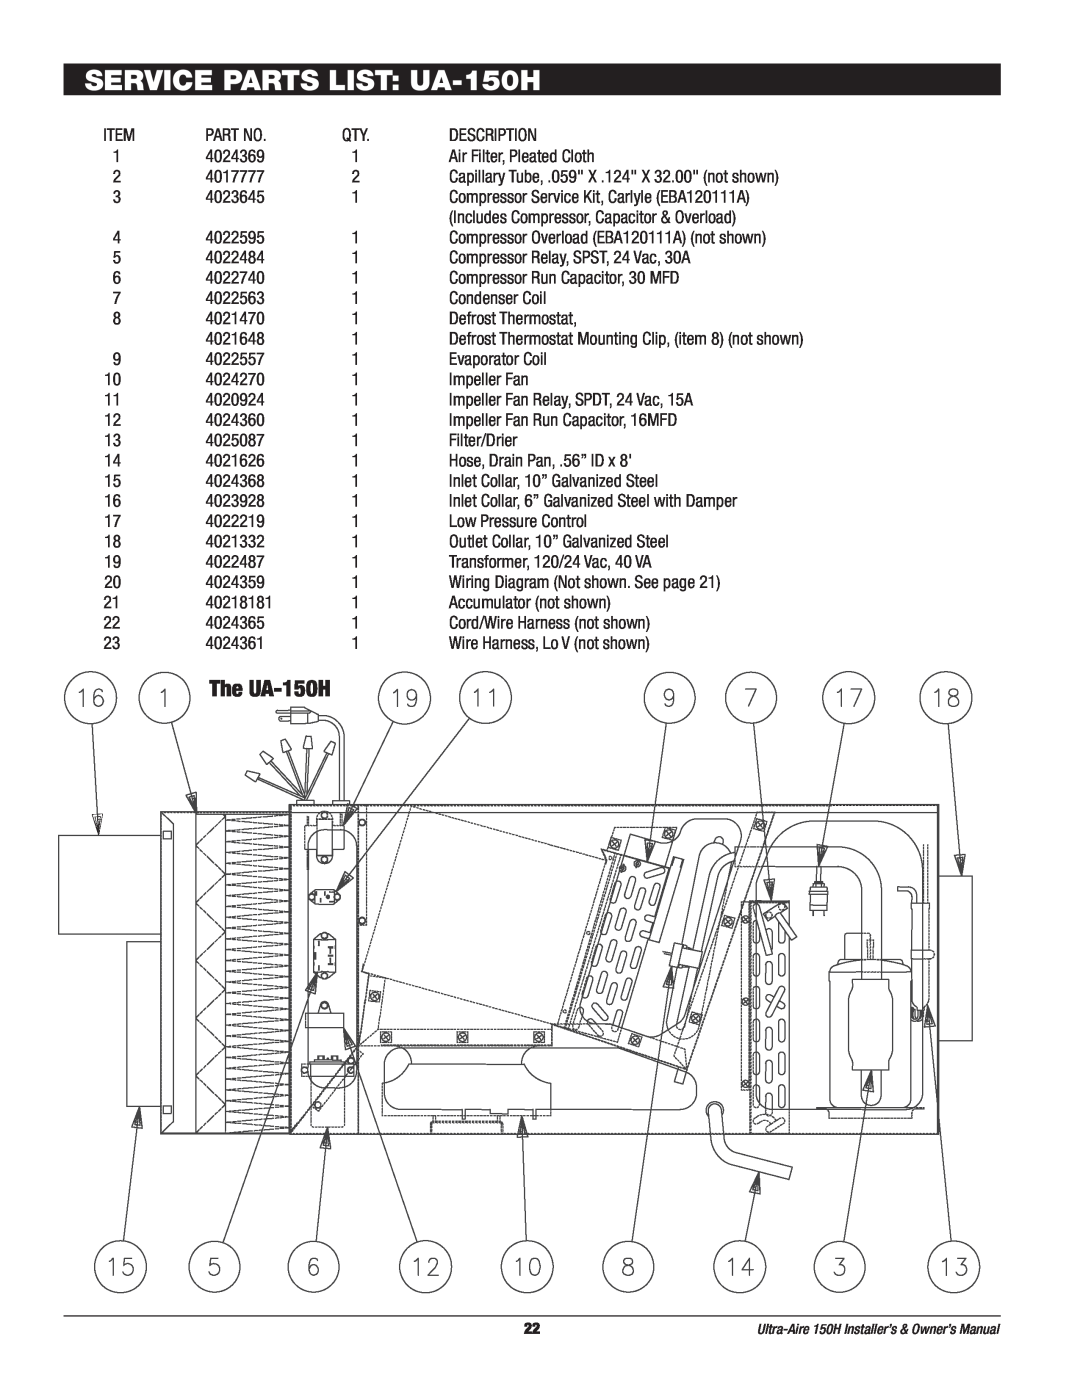 Therma-Stor Products Group owner manual SERVICE PARTS LIST UA-150H, The UA-150H 